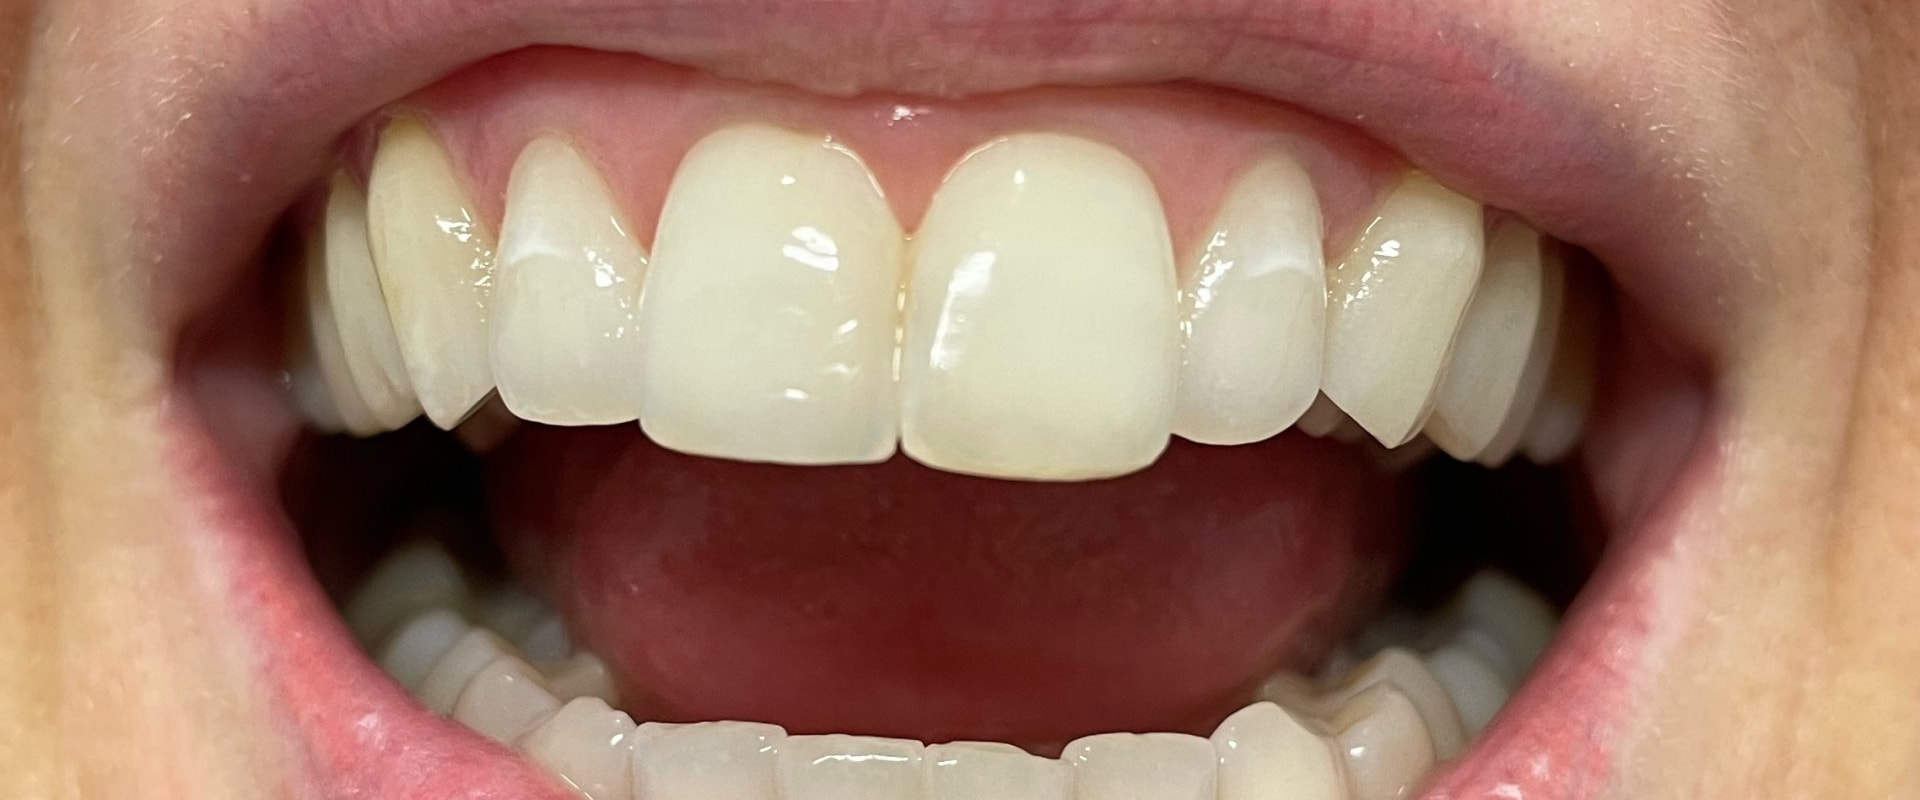 A Comprehensive Look at Enamel Reshaping Results